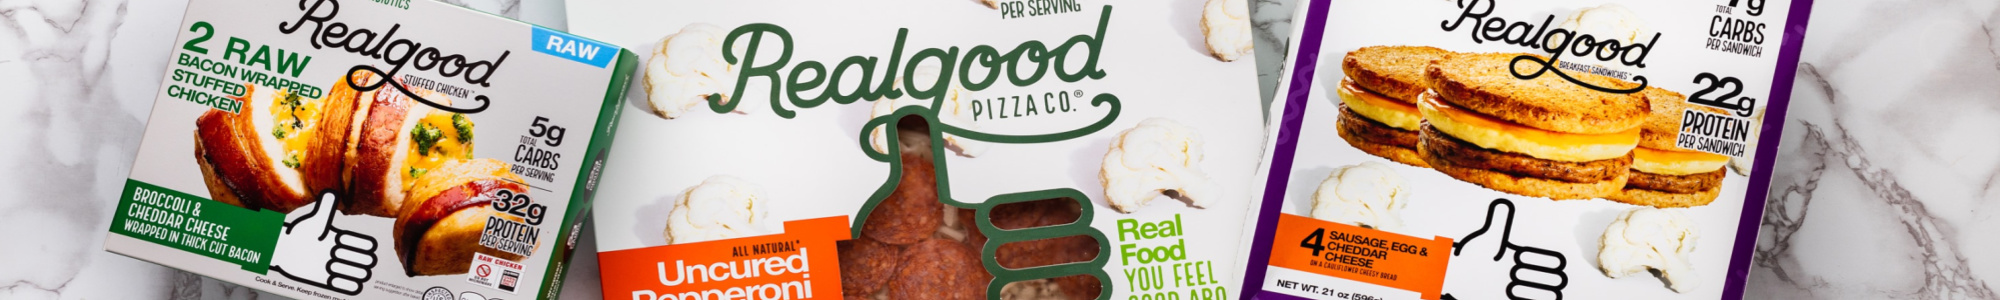 Real Good Foods banner image